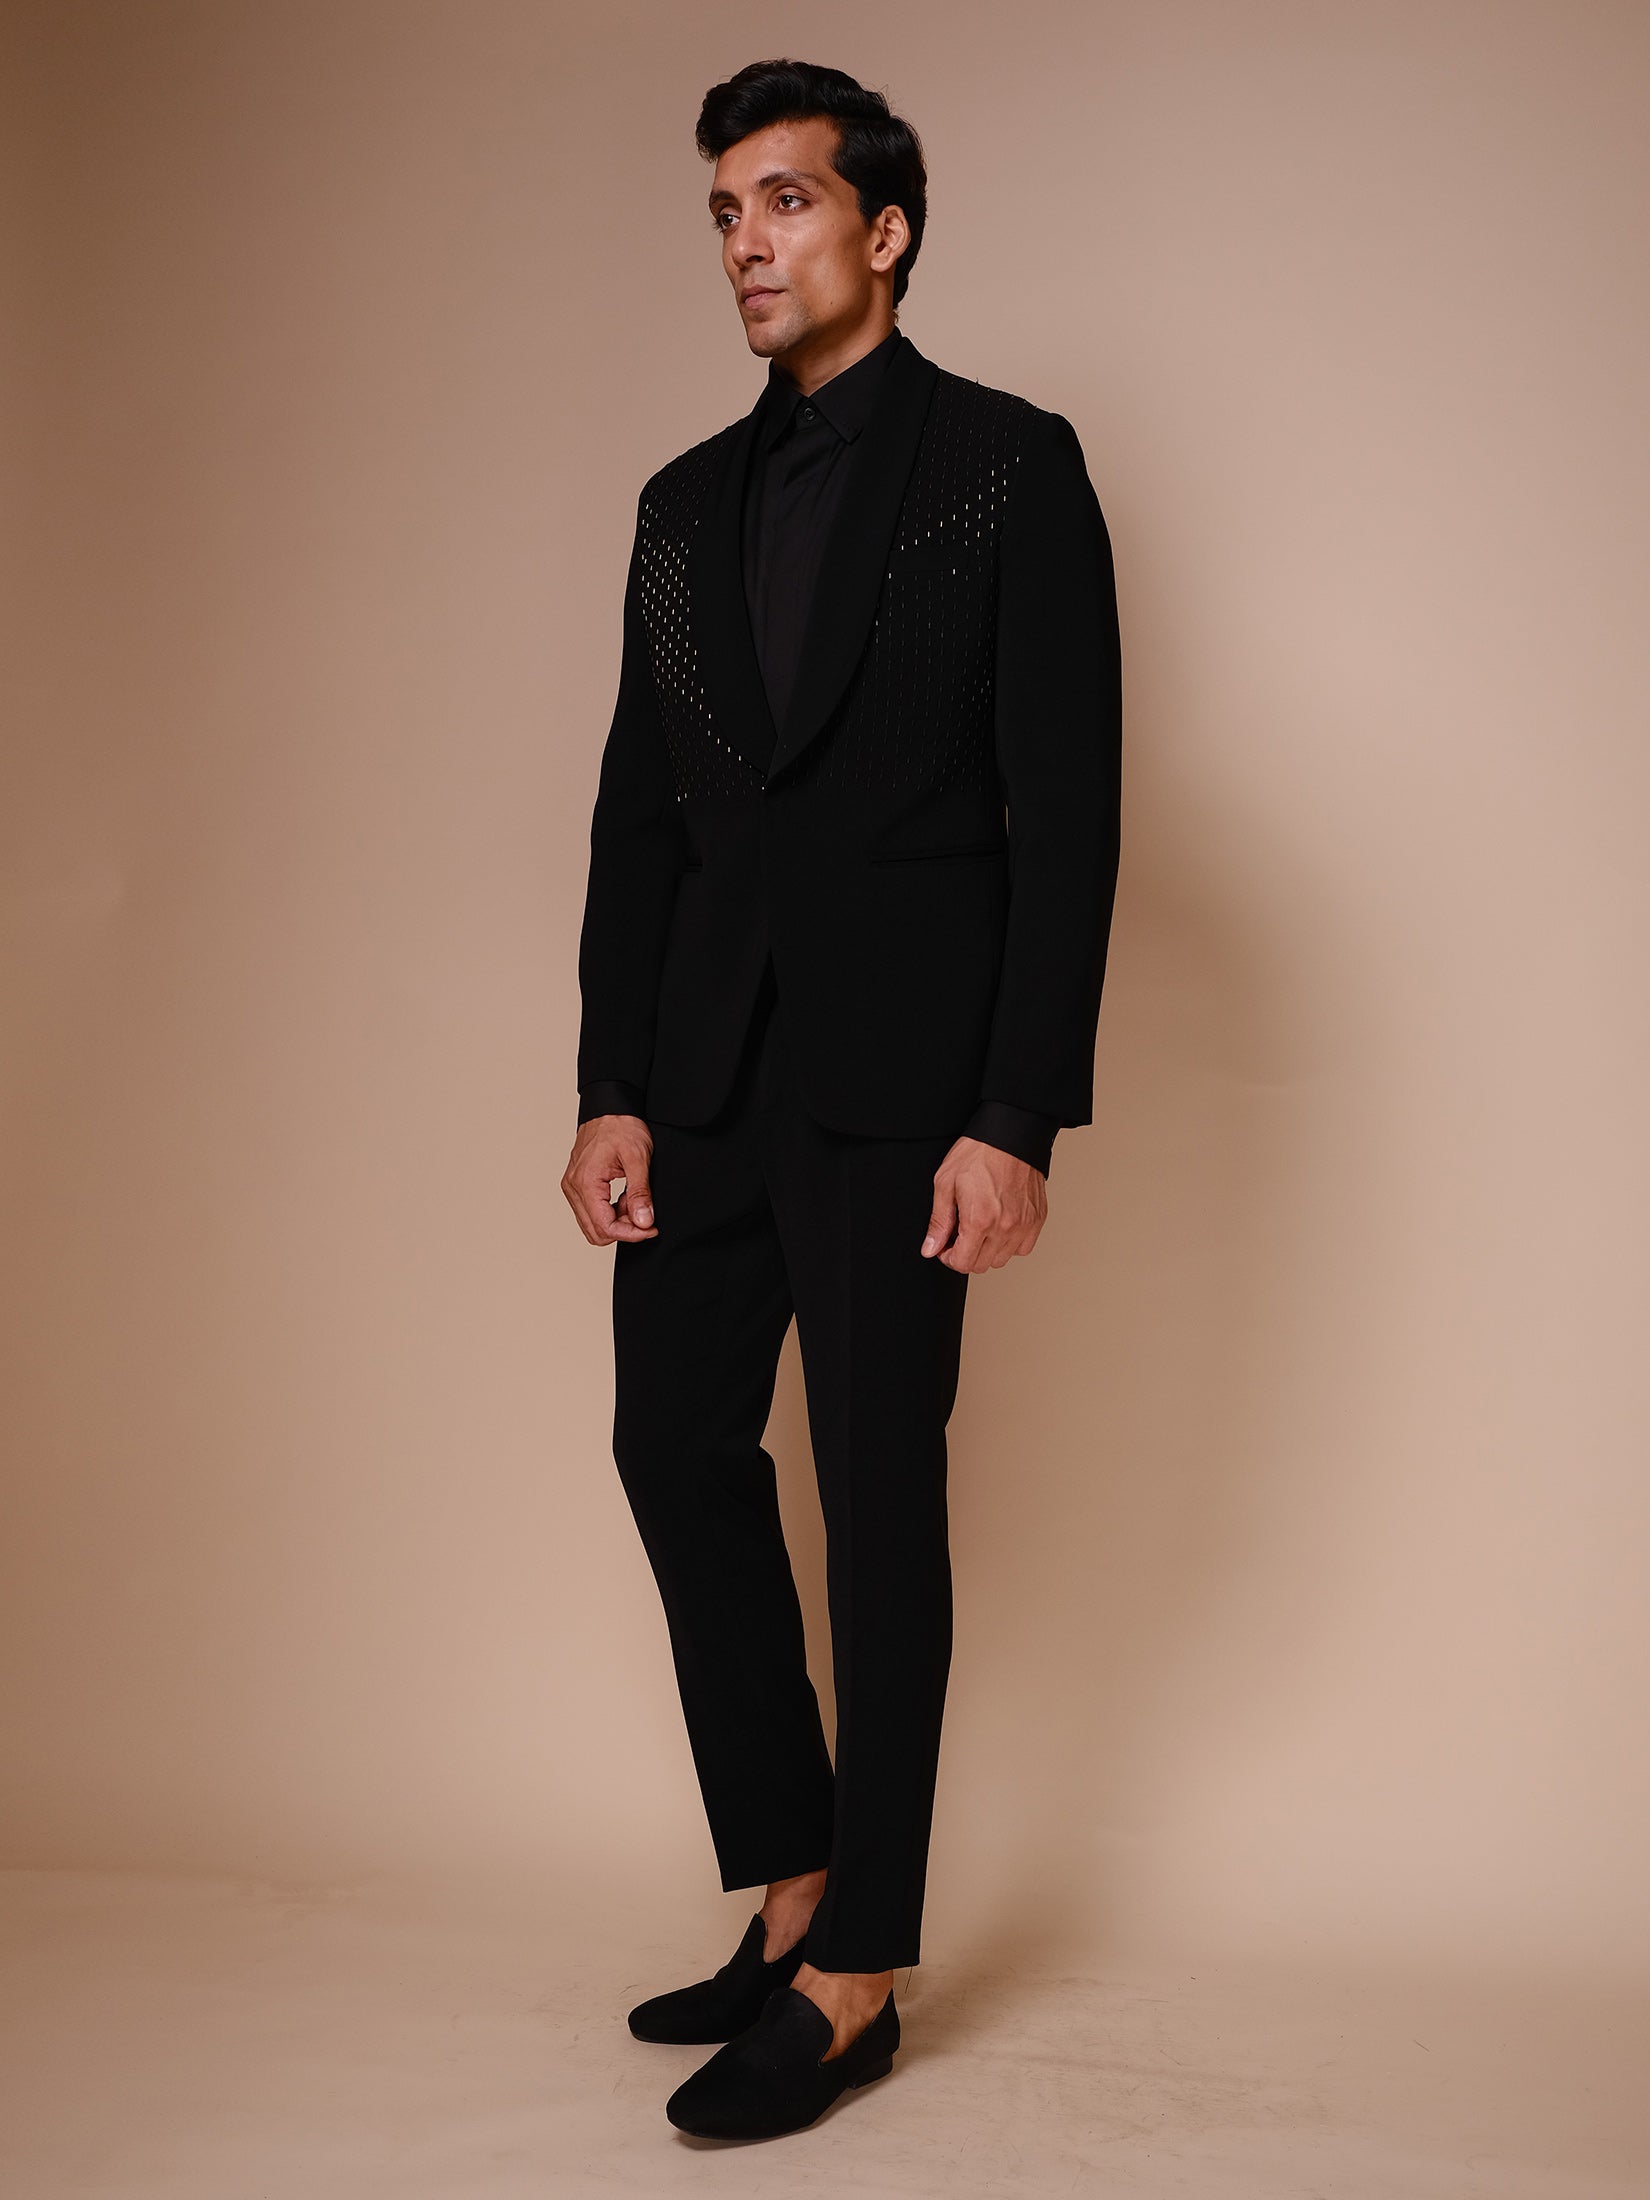 Black Shawl Lapel Tuxedo With Gold Embroidery Across Chest Paired With Trousers And Tonal Shirt